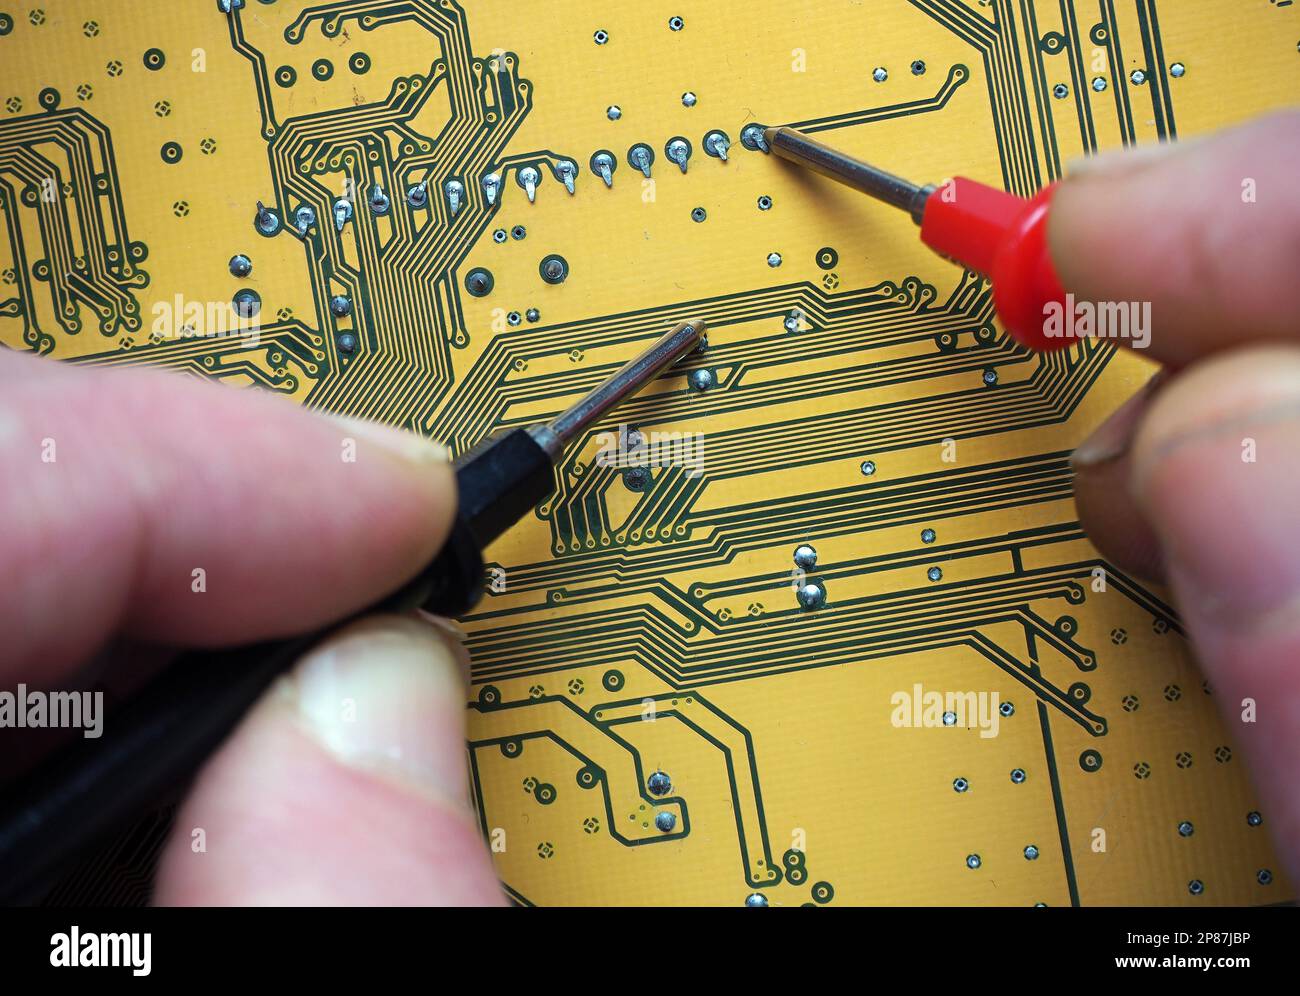 Fault detection with test probes on a digital board. Repair of an electronic device. Electronics Industry background. Stock Photo